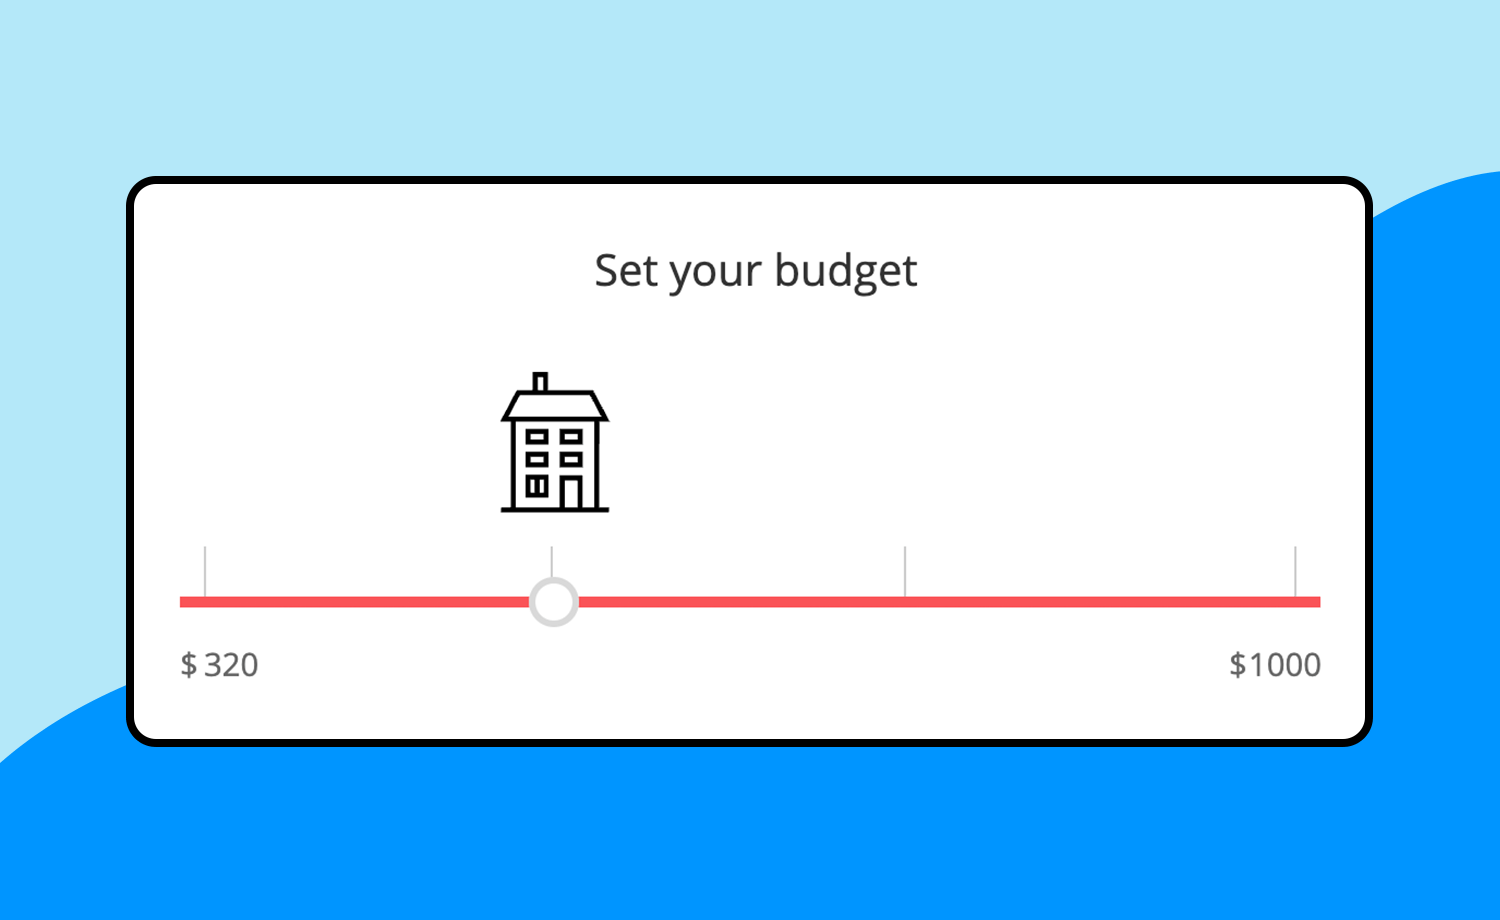 Budget setting tool with a slider for selecting a price range